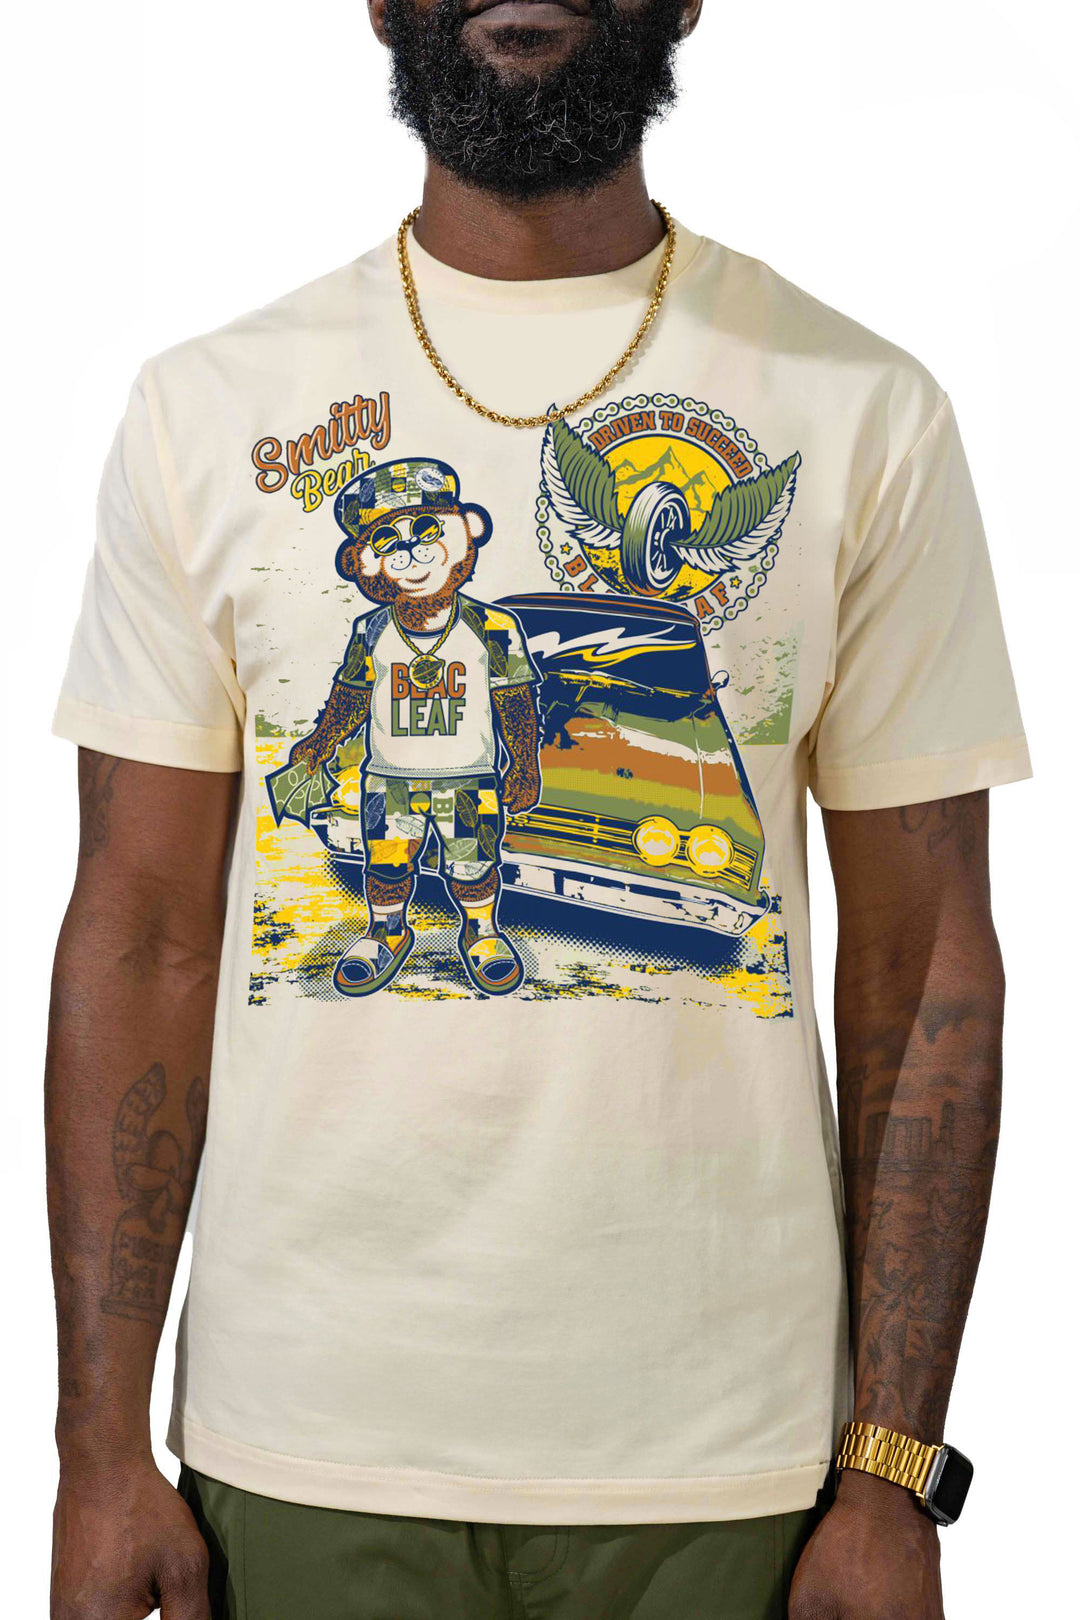 Driven To Succeed Smitty Cream Shirt